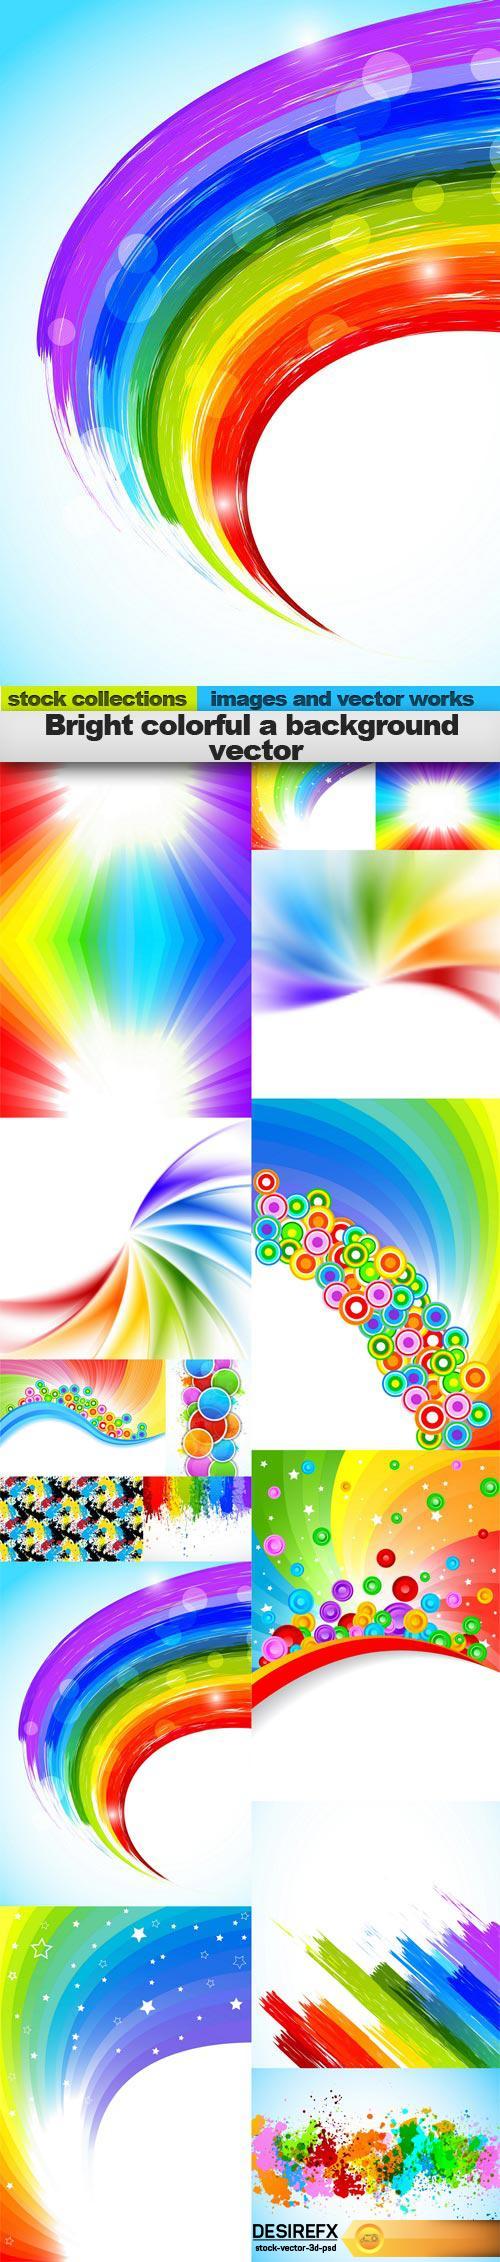 Bright colorful a background vector, 15 x EPS